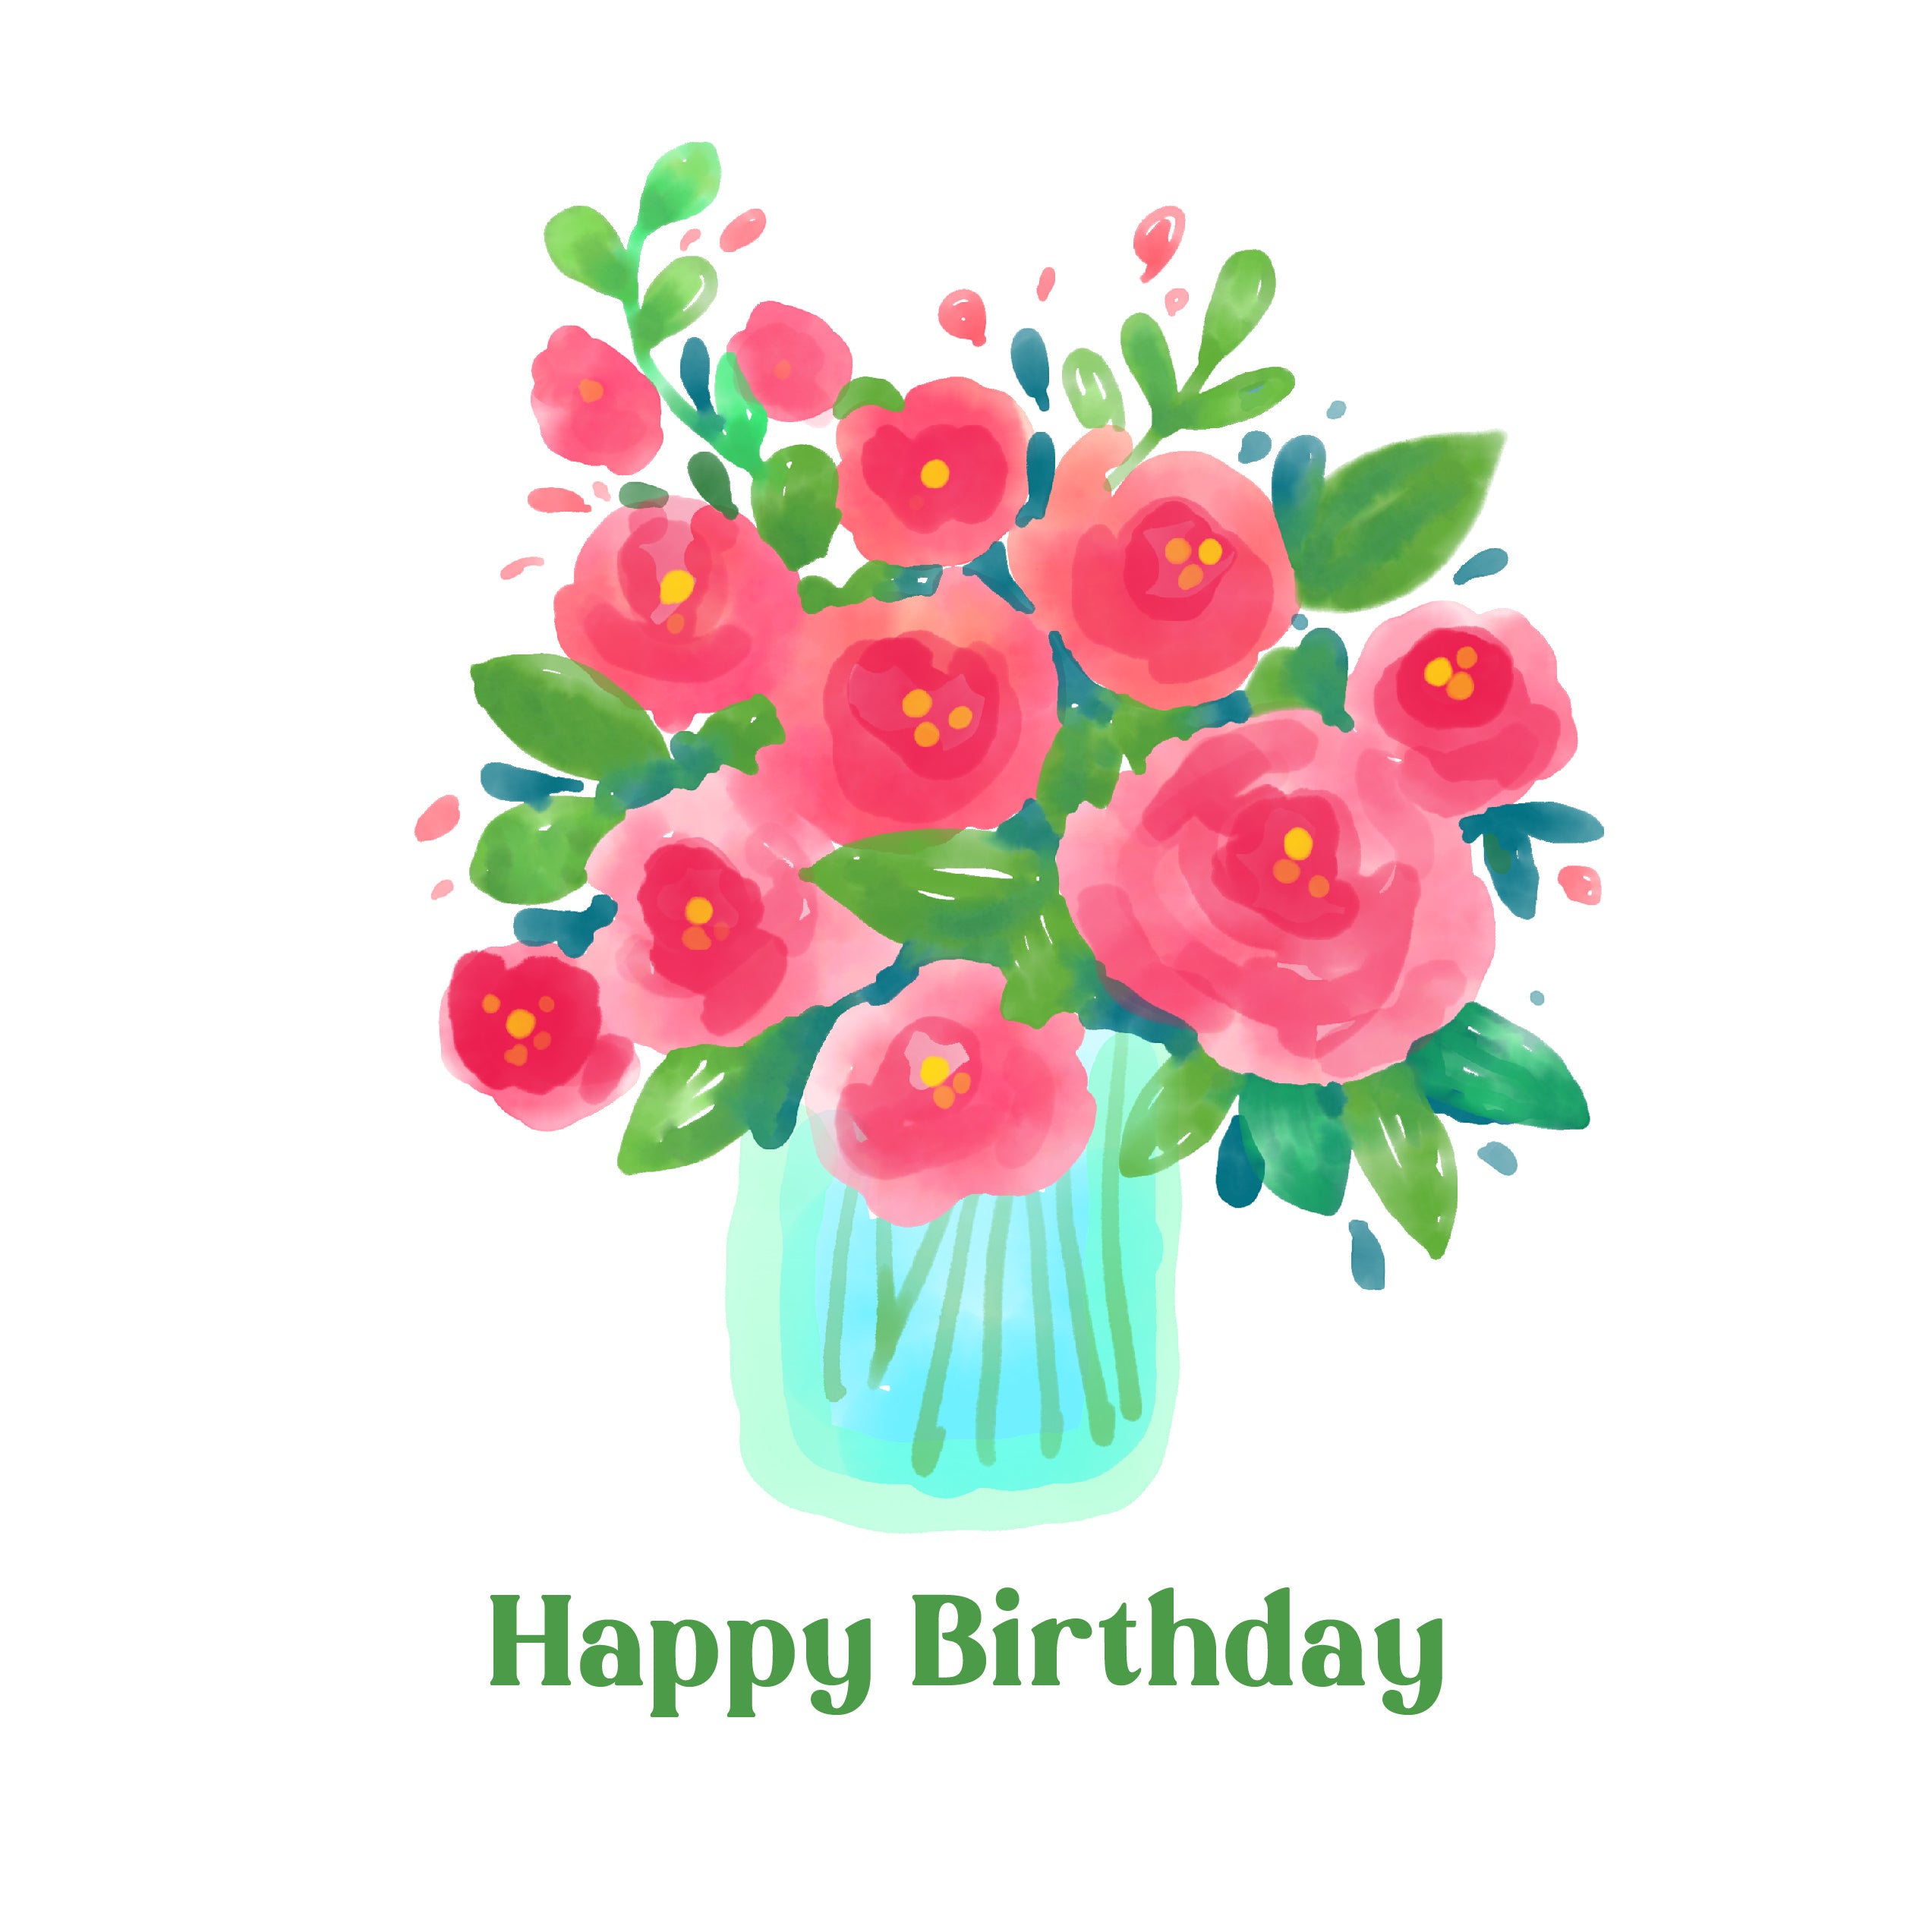 Happy Birthday Flowers Clipart For Her | Best Flower Site